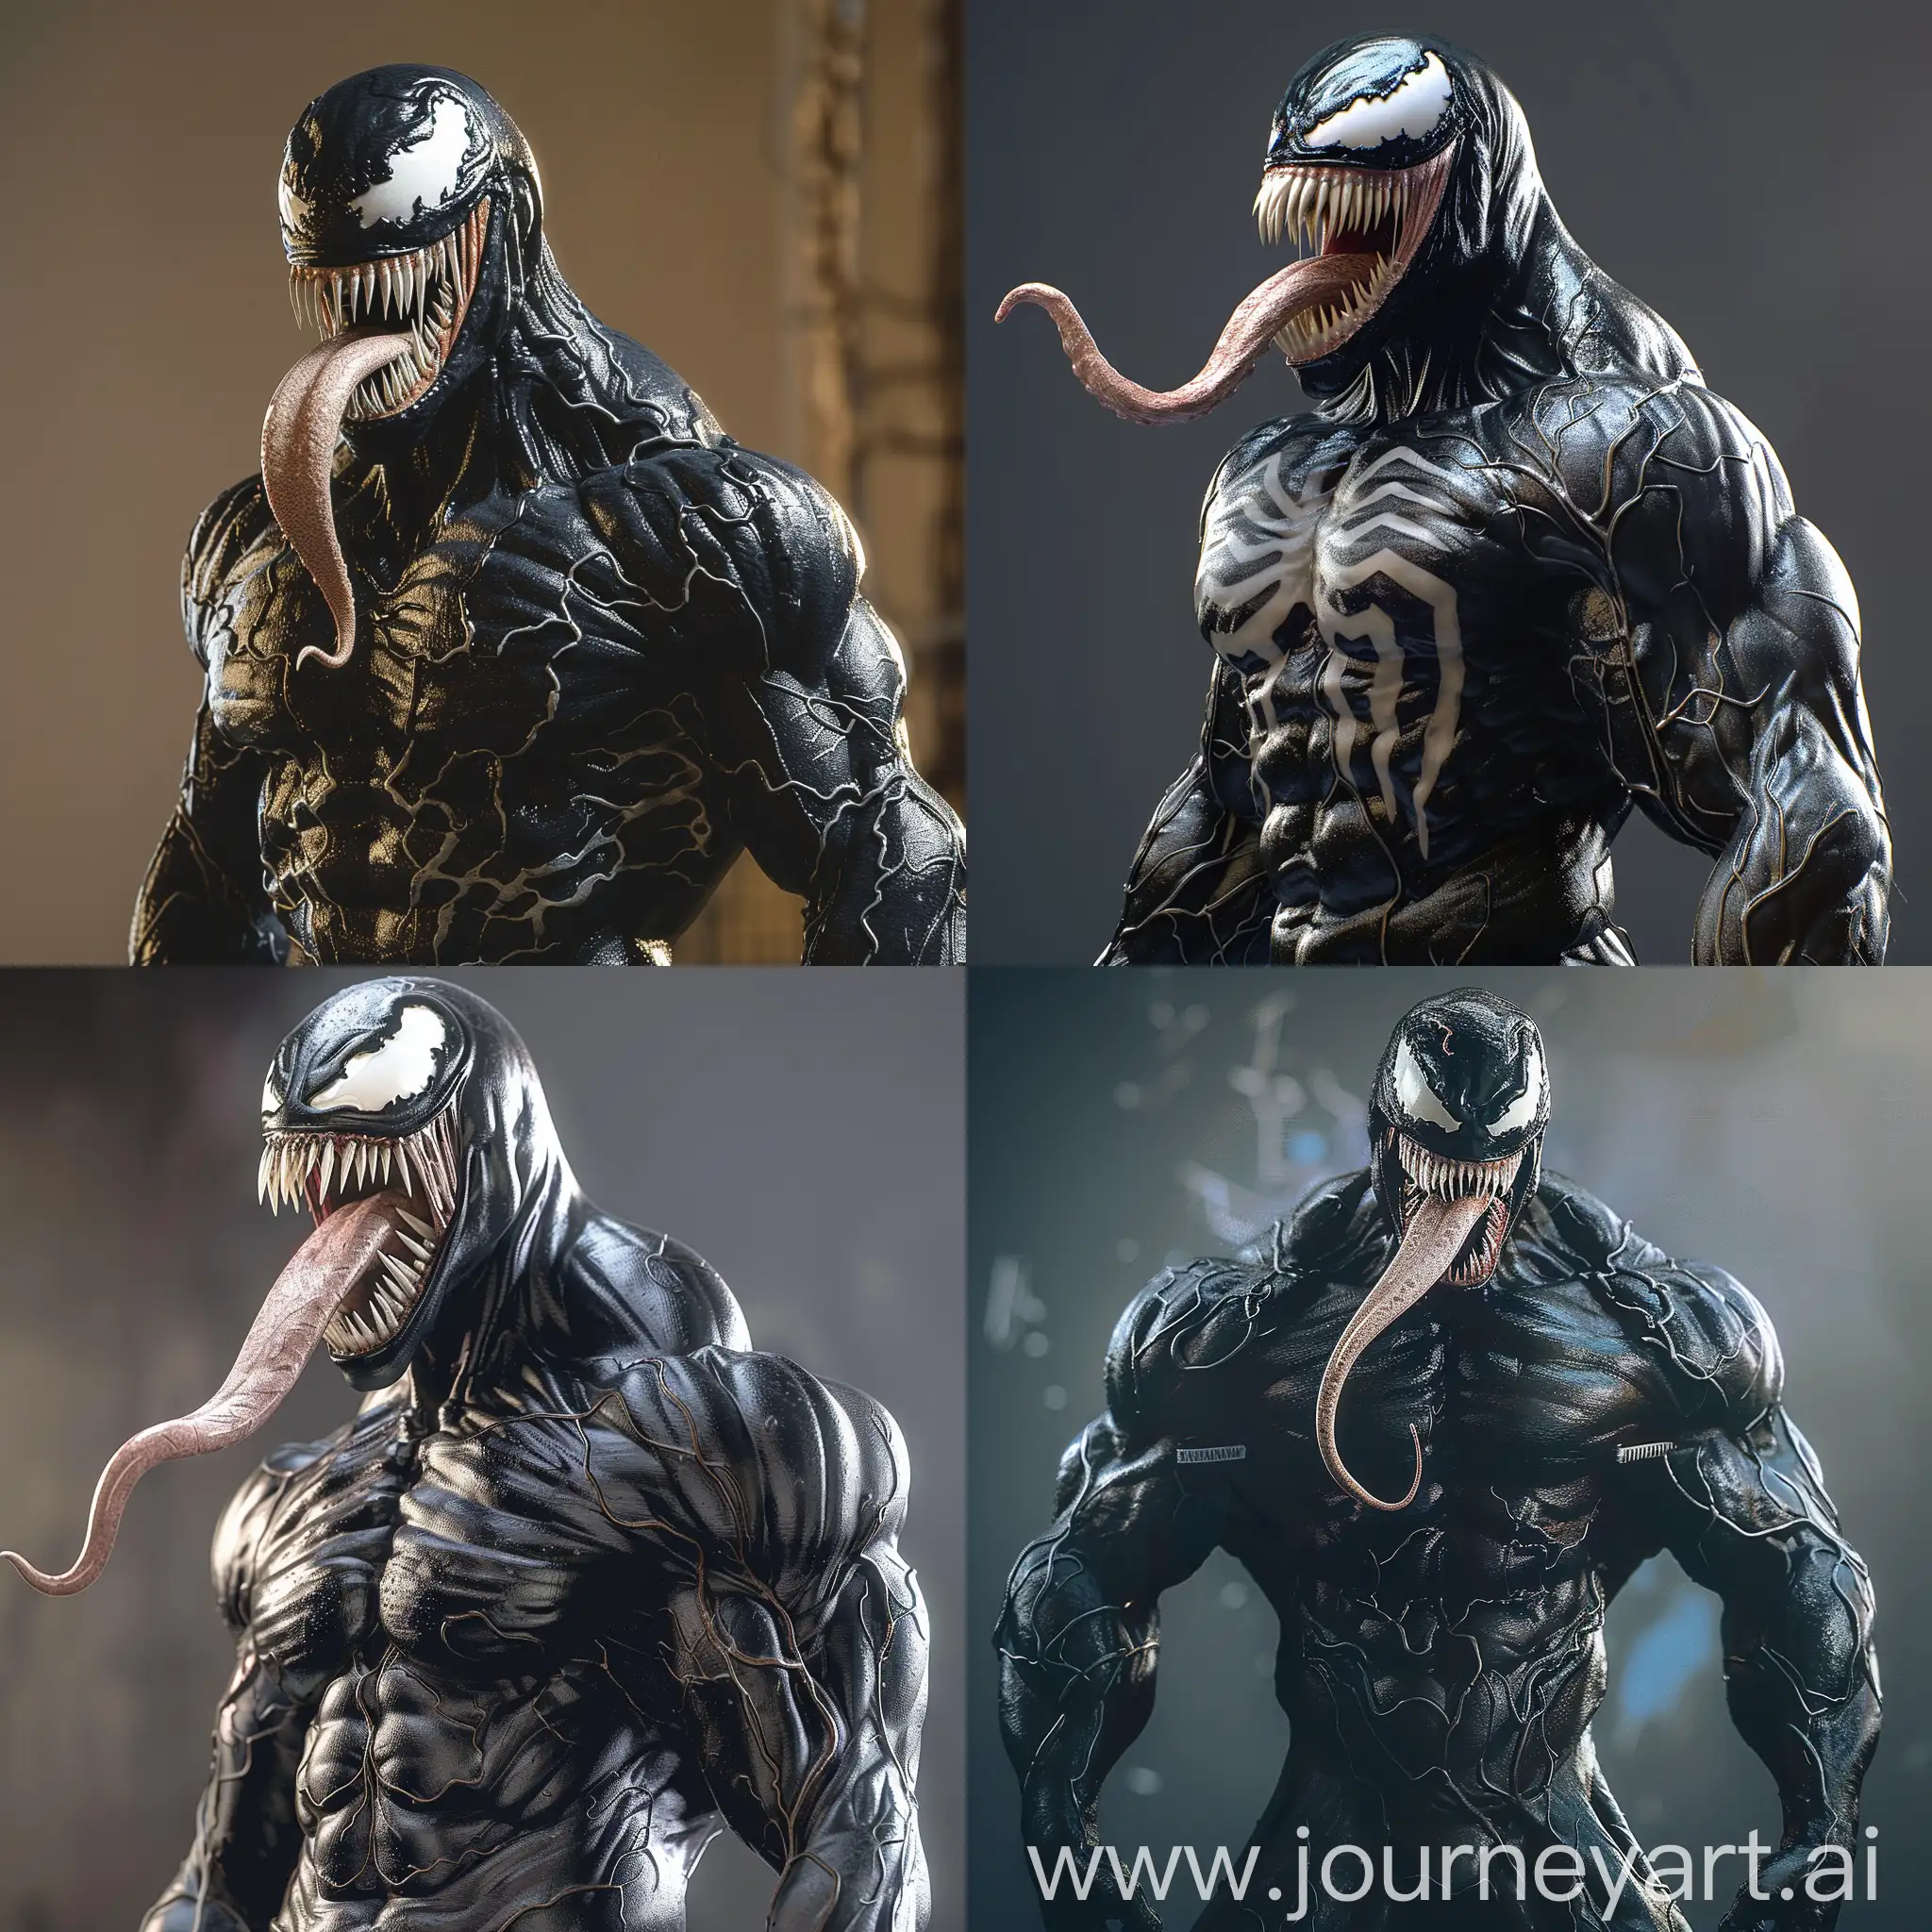 Venom-Marvel-Comics-Character-Flexing-Defined-Muscles-with-Tongue-Out